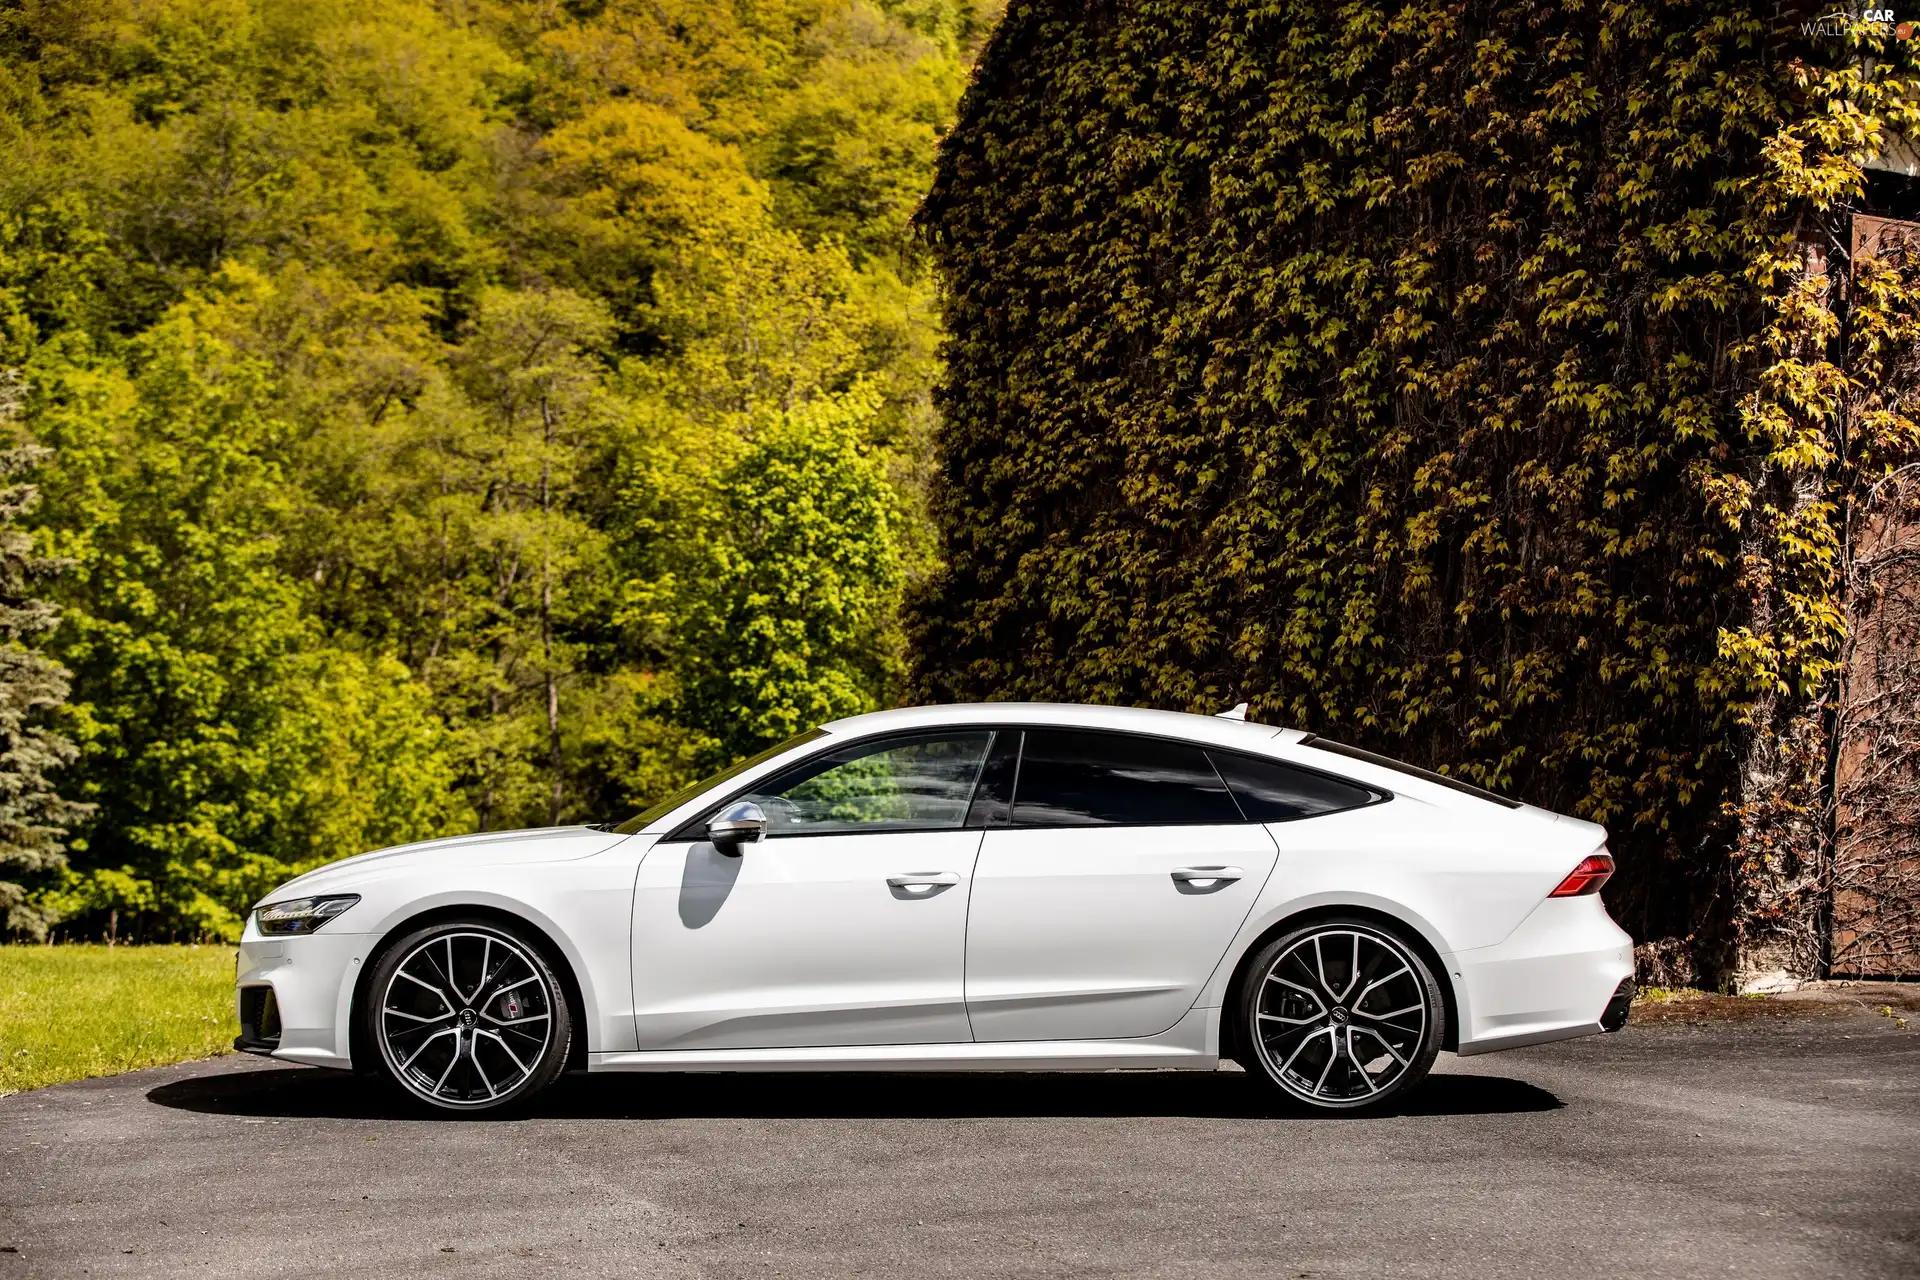 S7, White, viewes, house, trees, Audi A7